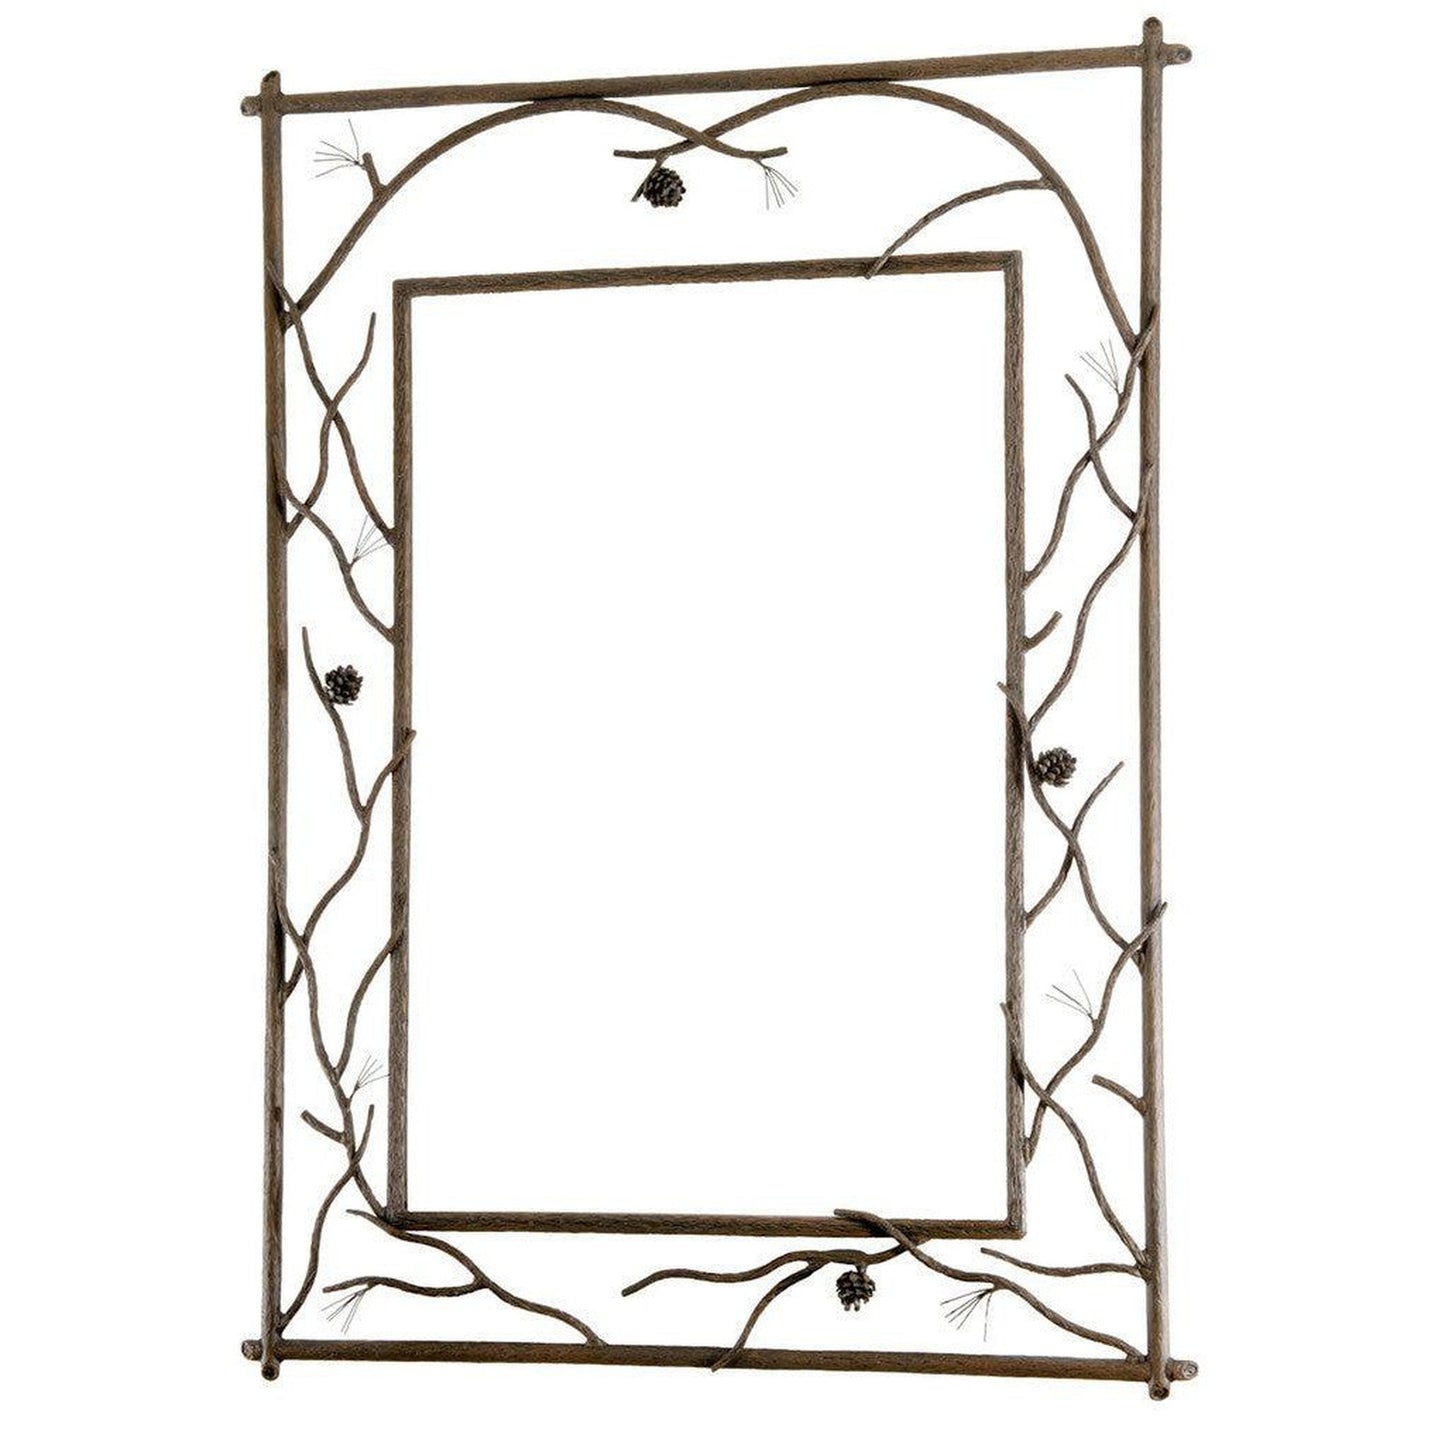 Stone County Ironworks Pine 29" x 35" Small Natural Bark Branched Iron Wall Mirror With Pewter Iron Accent